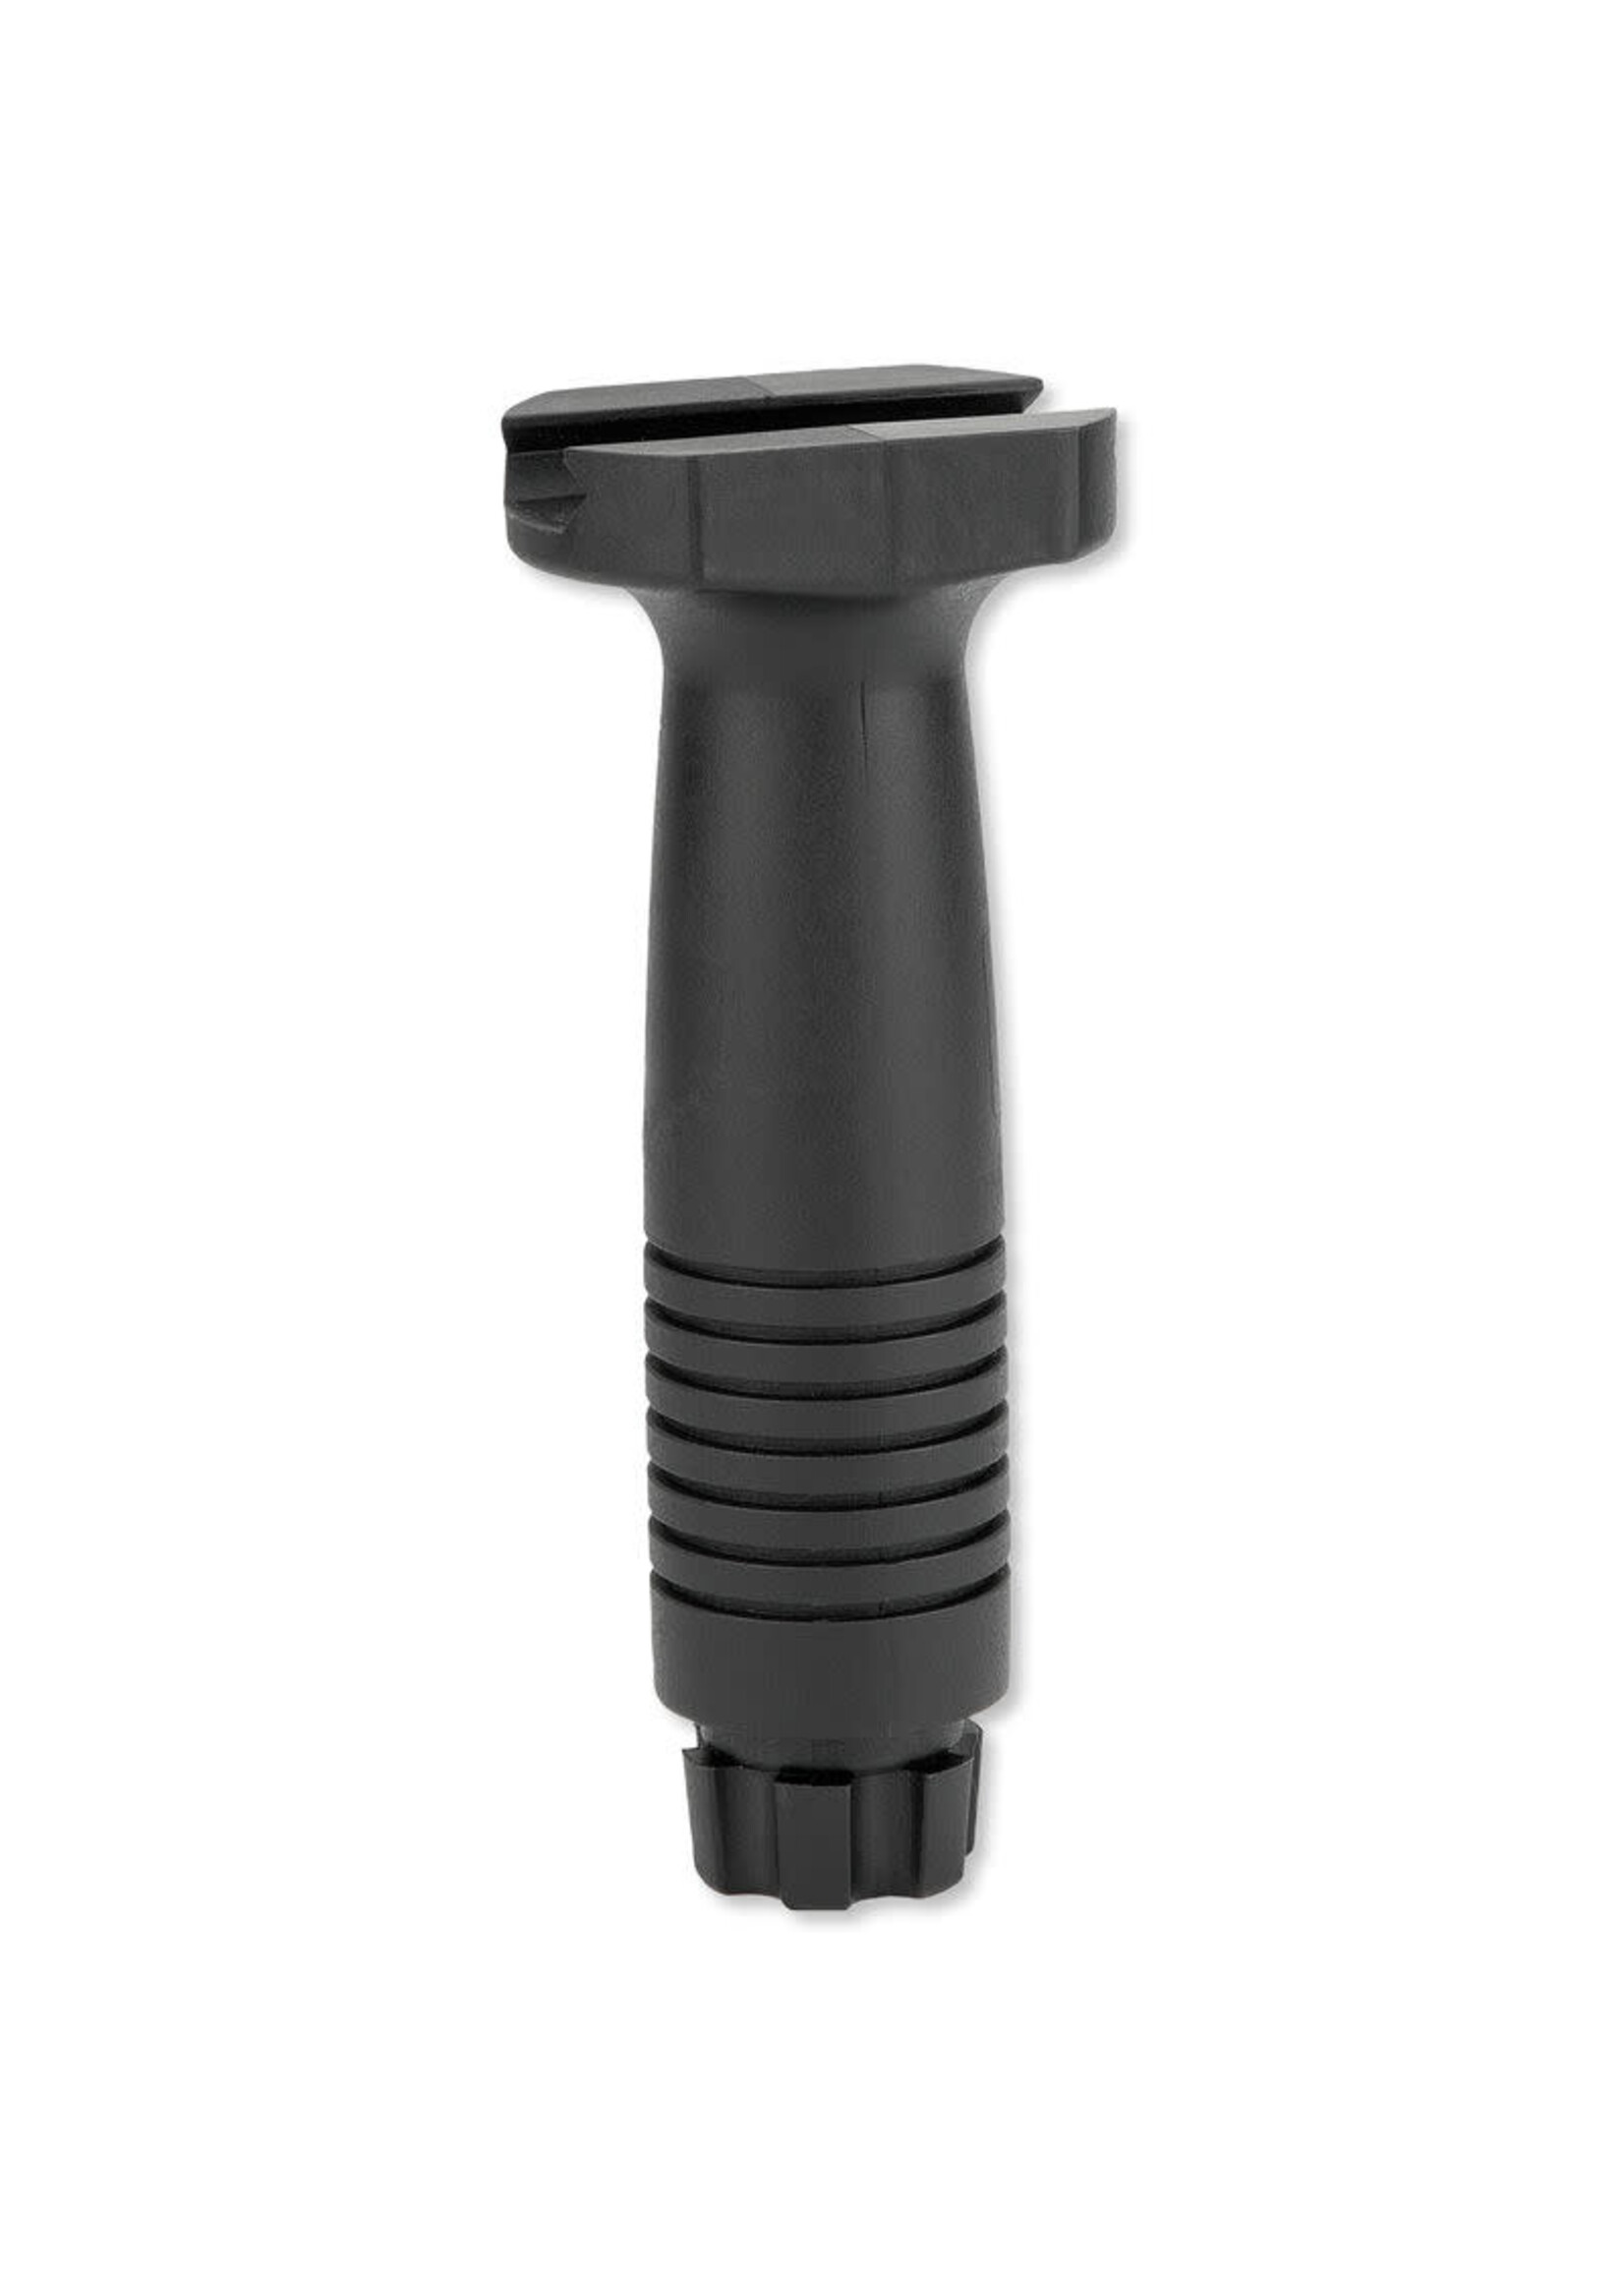 PROMAG AR15 SWISS PATTERN POLYMER VERTICAL GRIP FOR PICATINNY - BLACK